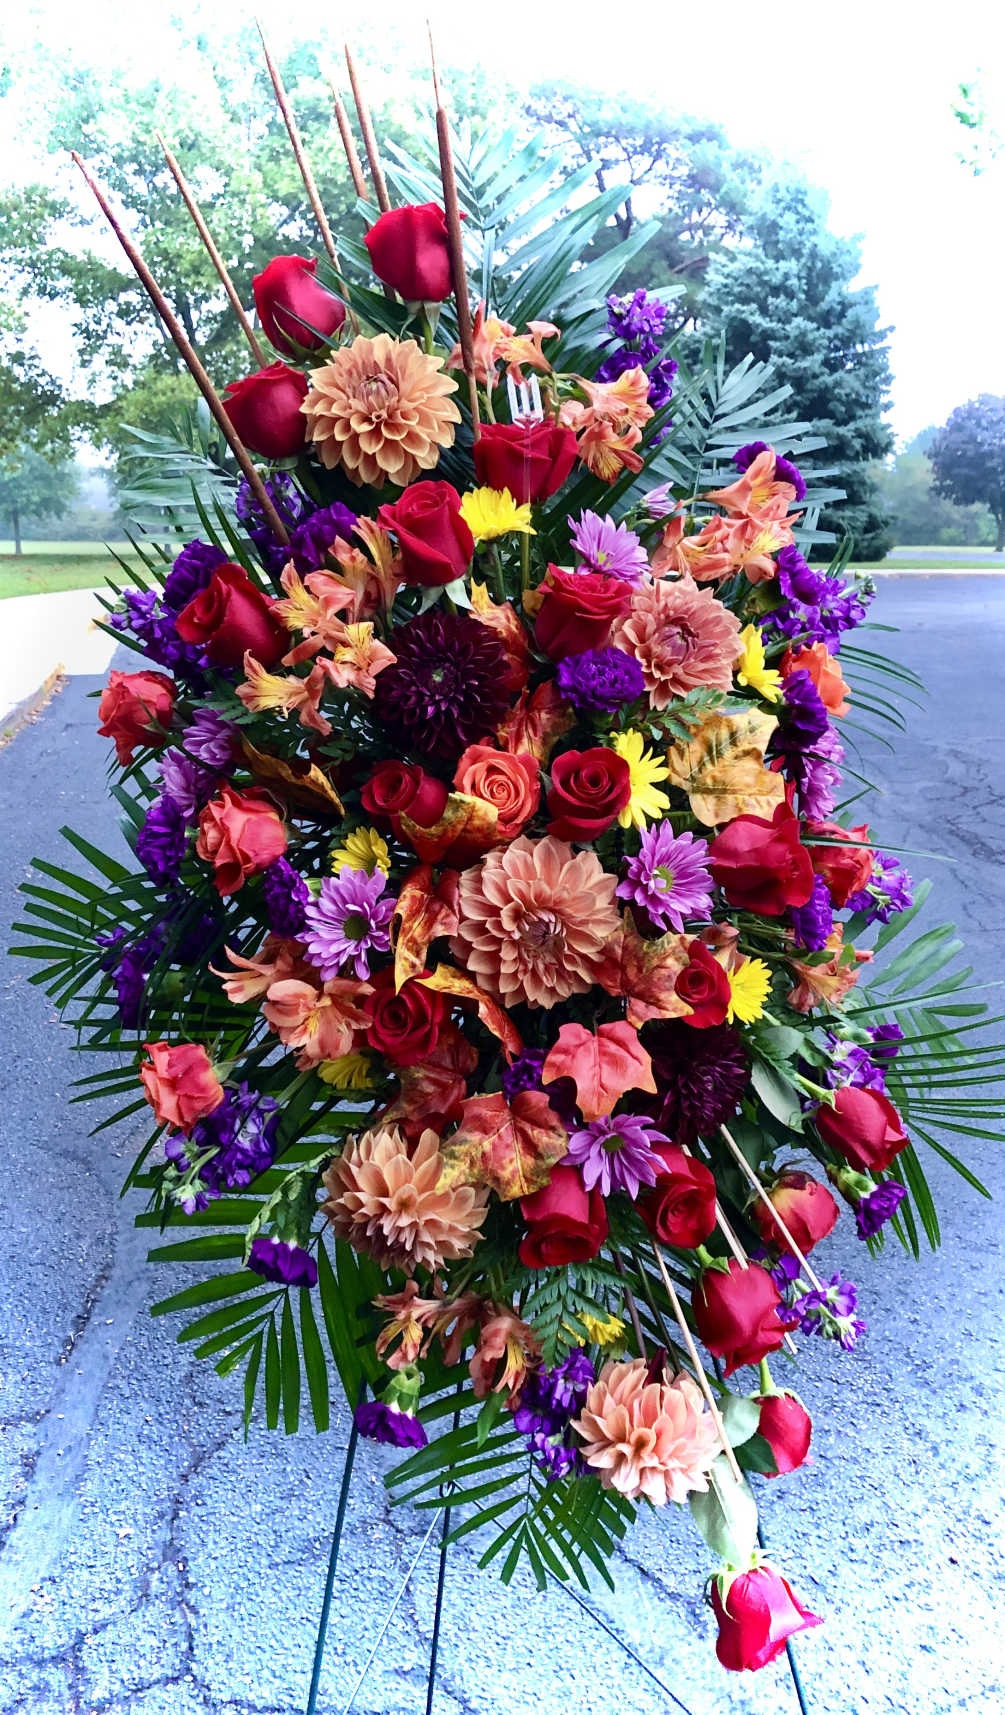 Beautiful mix of Fall colors, with roses, carnations, dahlias, lilies, alstroemeria, daisies